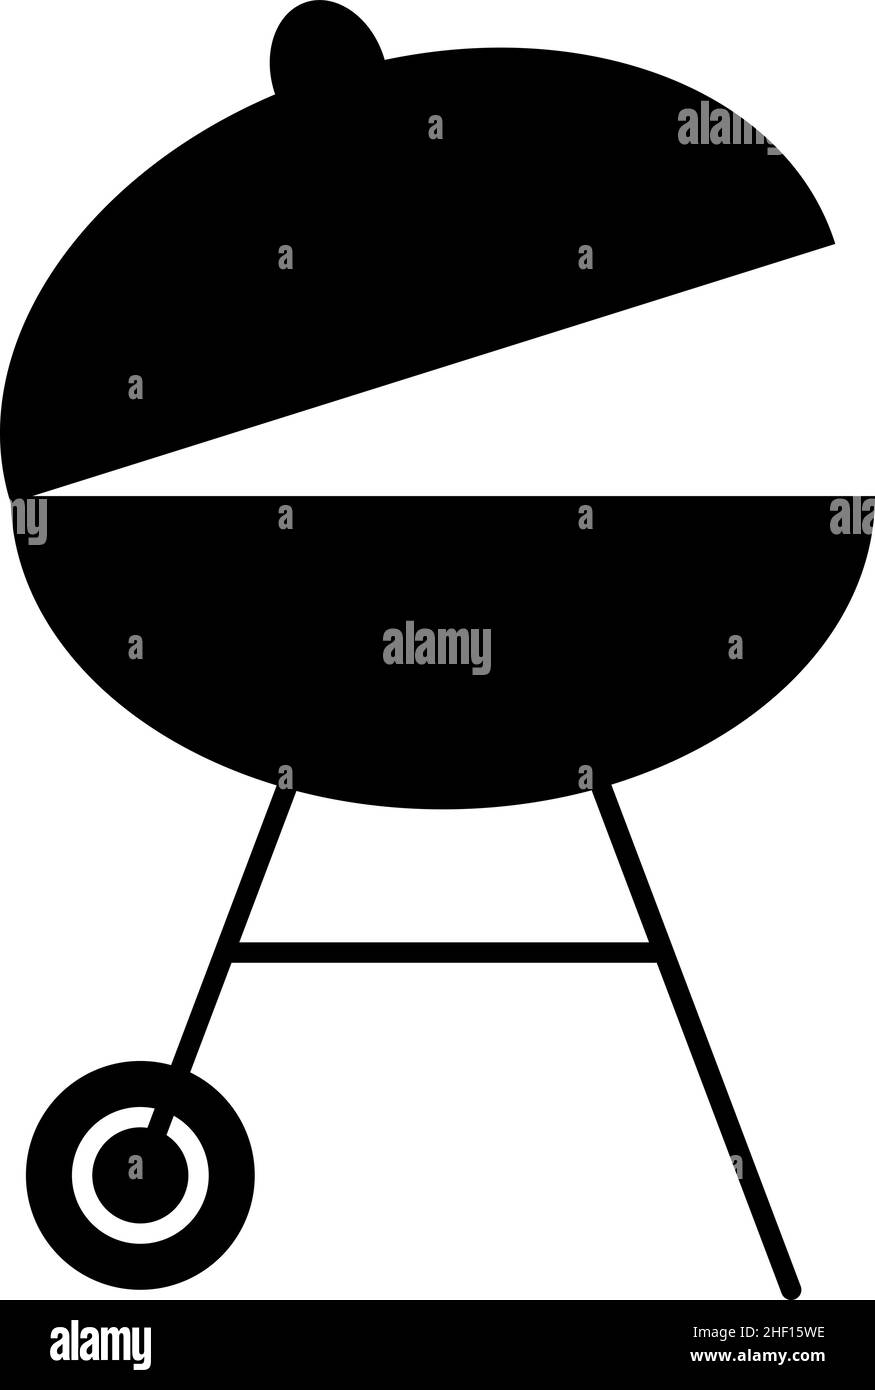 Barbeque Grill Glyph Icon Vector Stock Vector